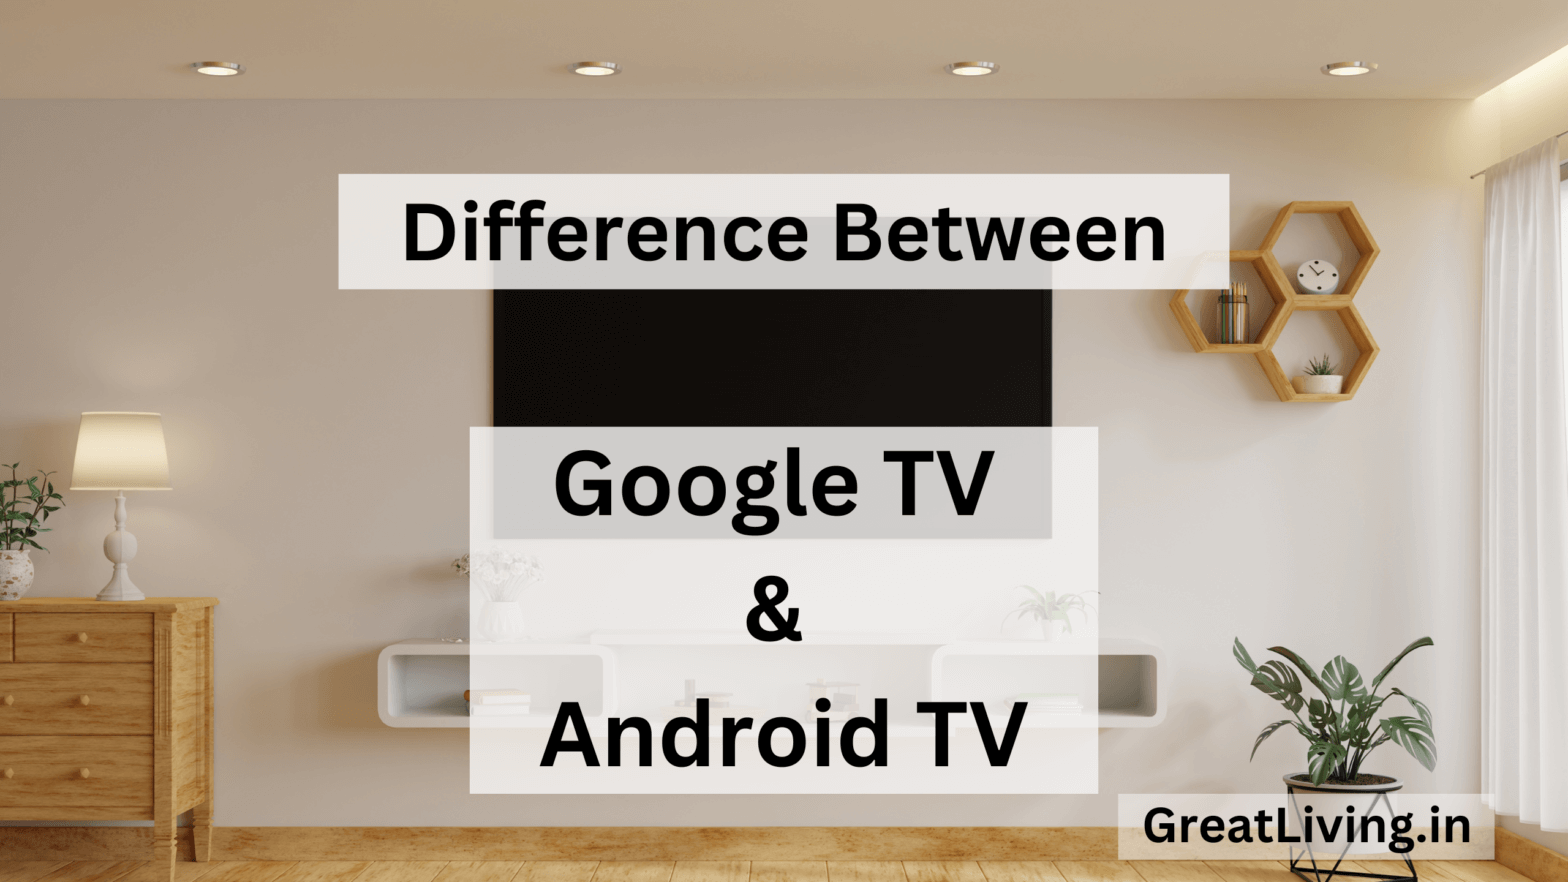 Difference Between Google TV and Android TV